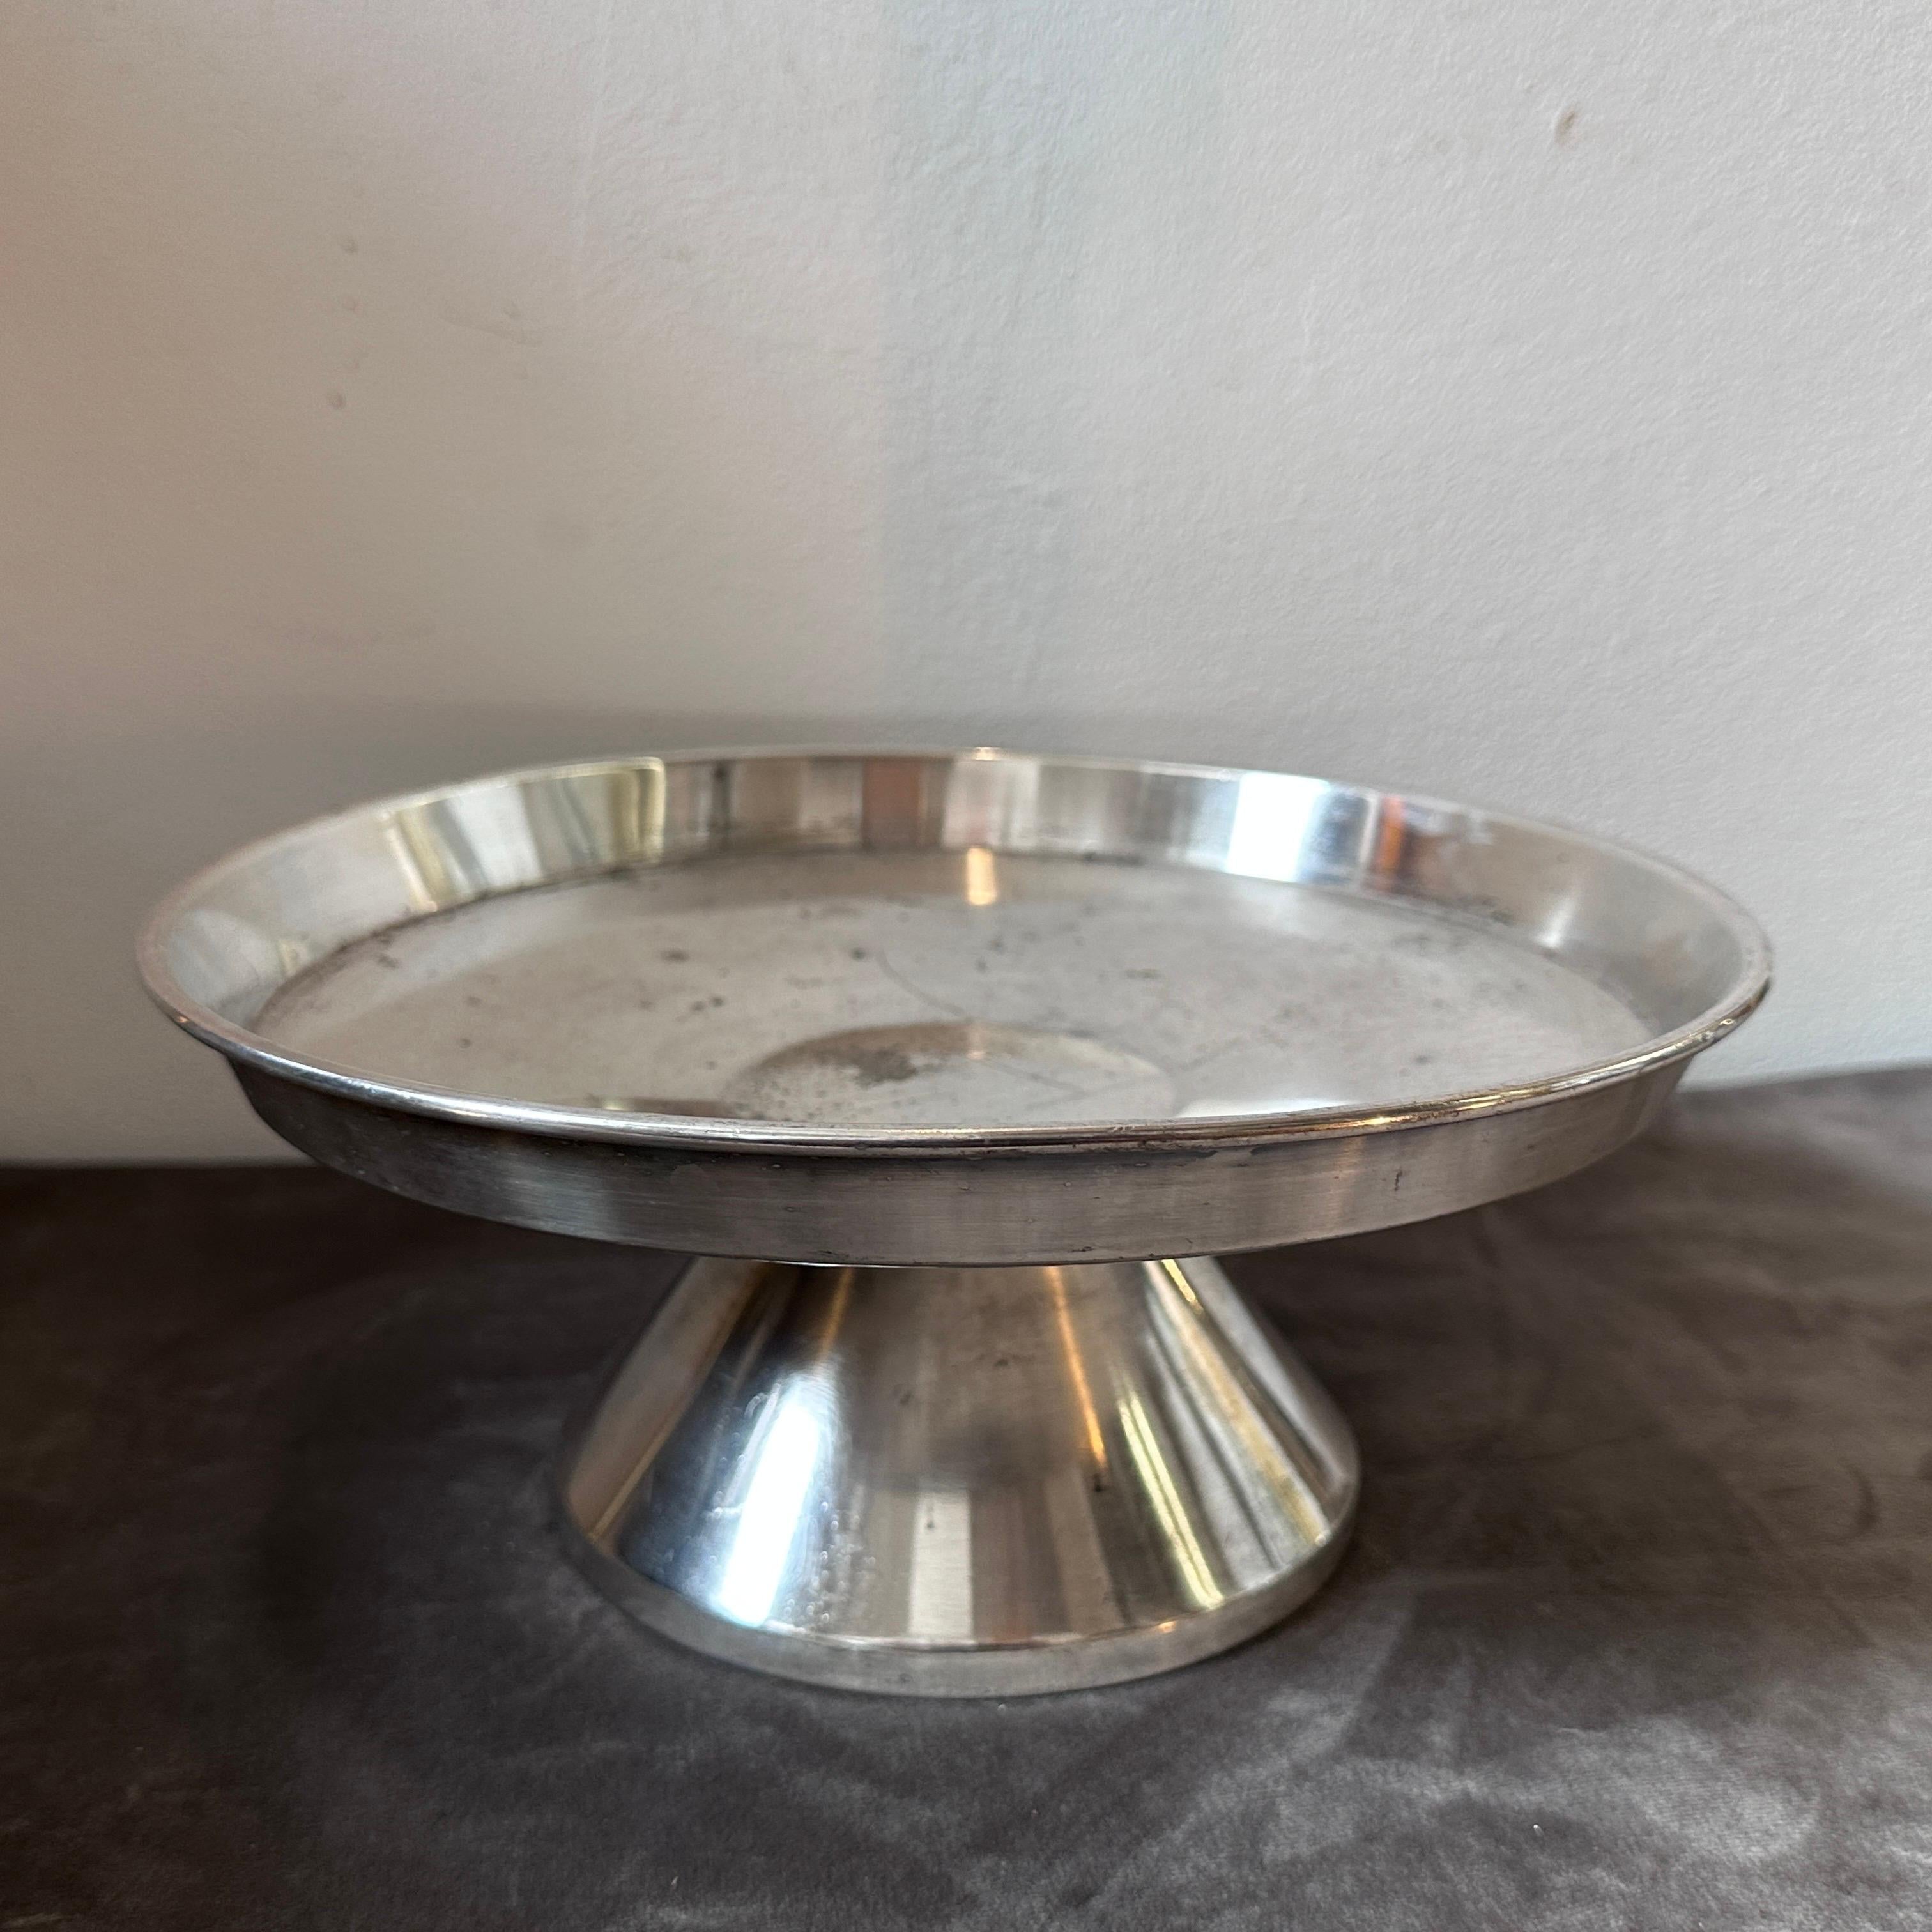 An alpaca centerpiece designed by Gio Ponti for Krupp Milano, it was used for hotellerie, it's in original conditions. It'is a remarkable and collectible piece of functional art. Gio Ponti was a prominent figure in Mid-Century Modern design, known